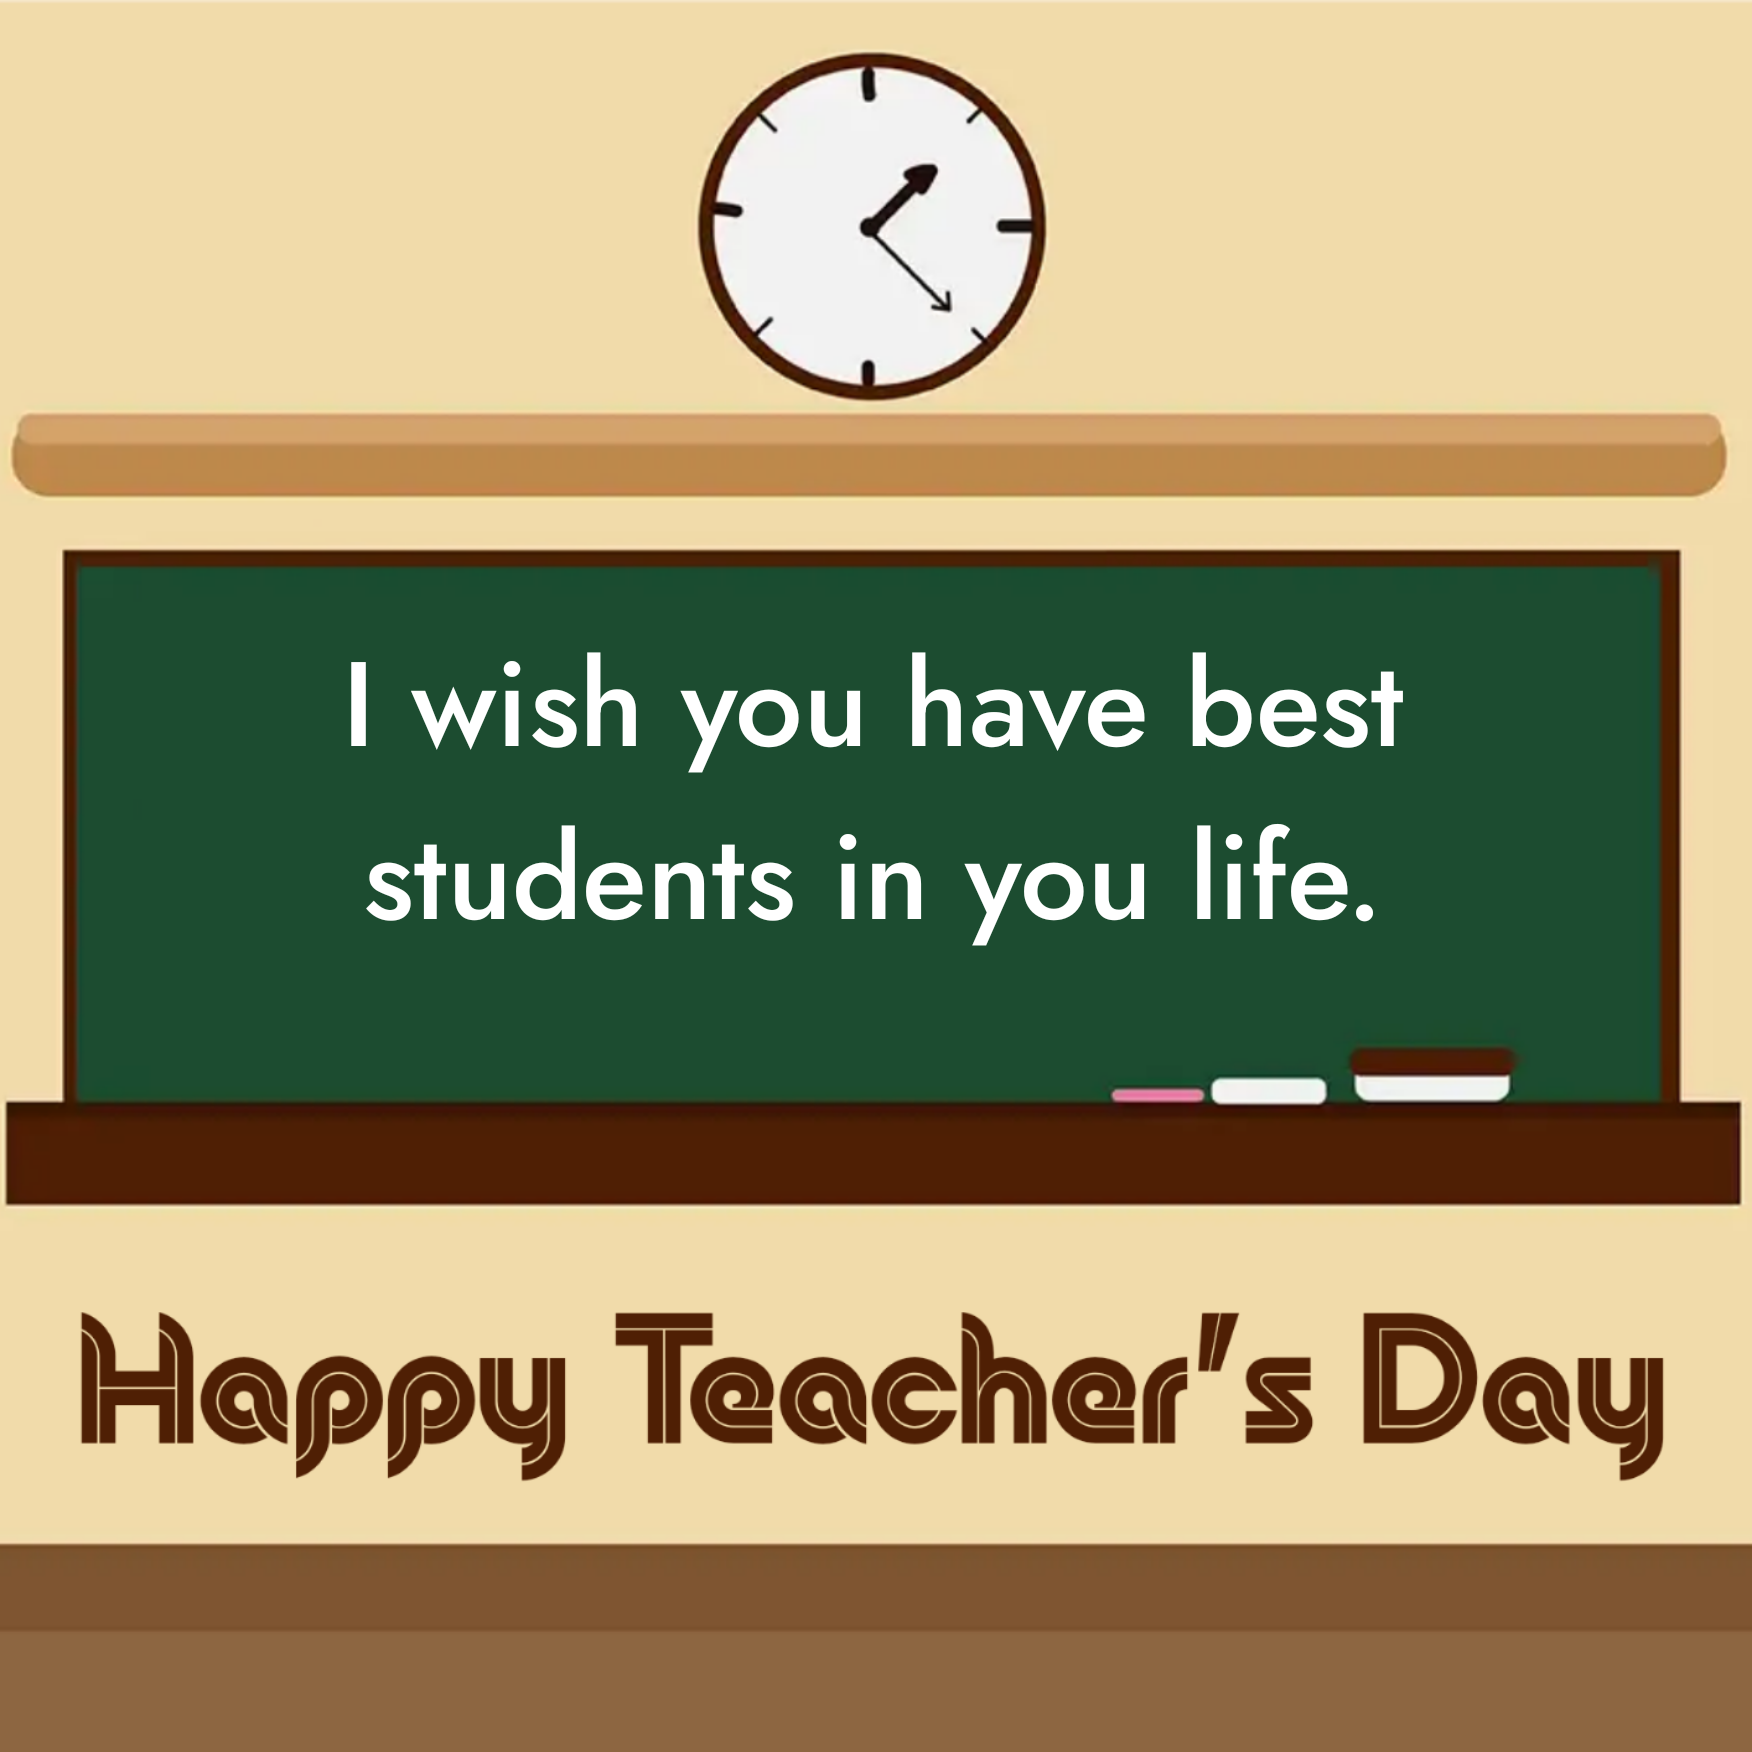 I wish you have best students in you life